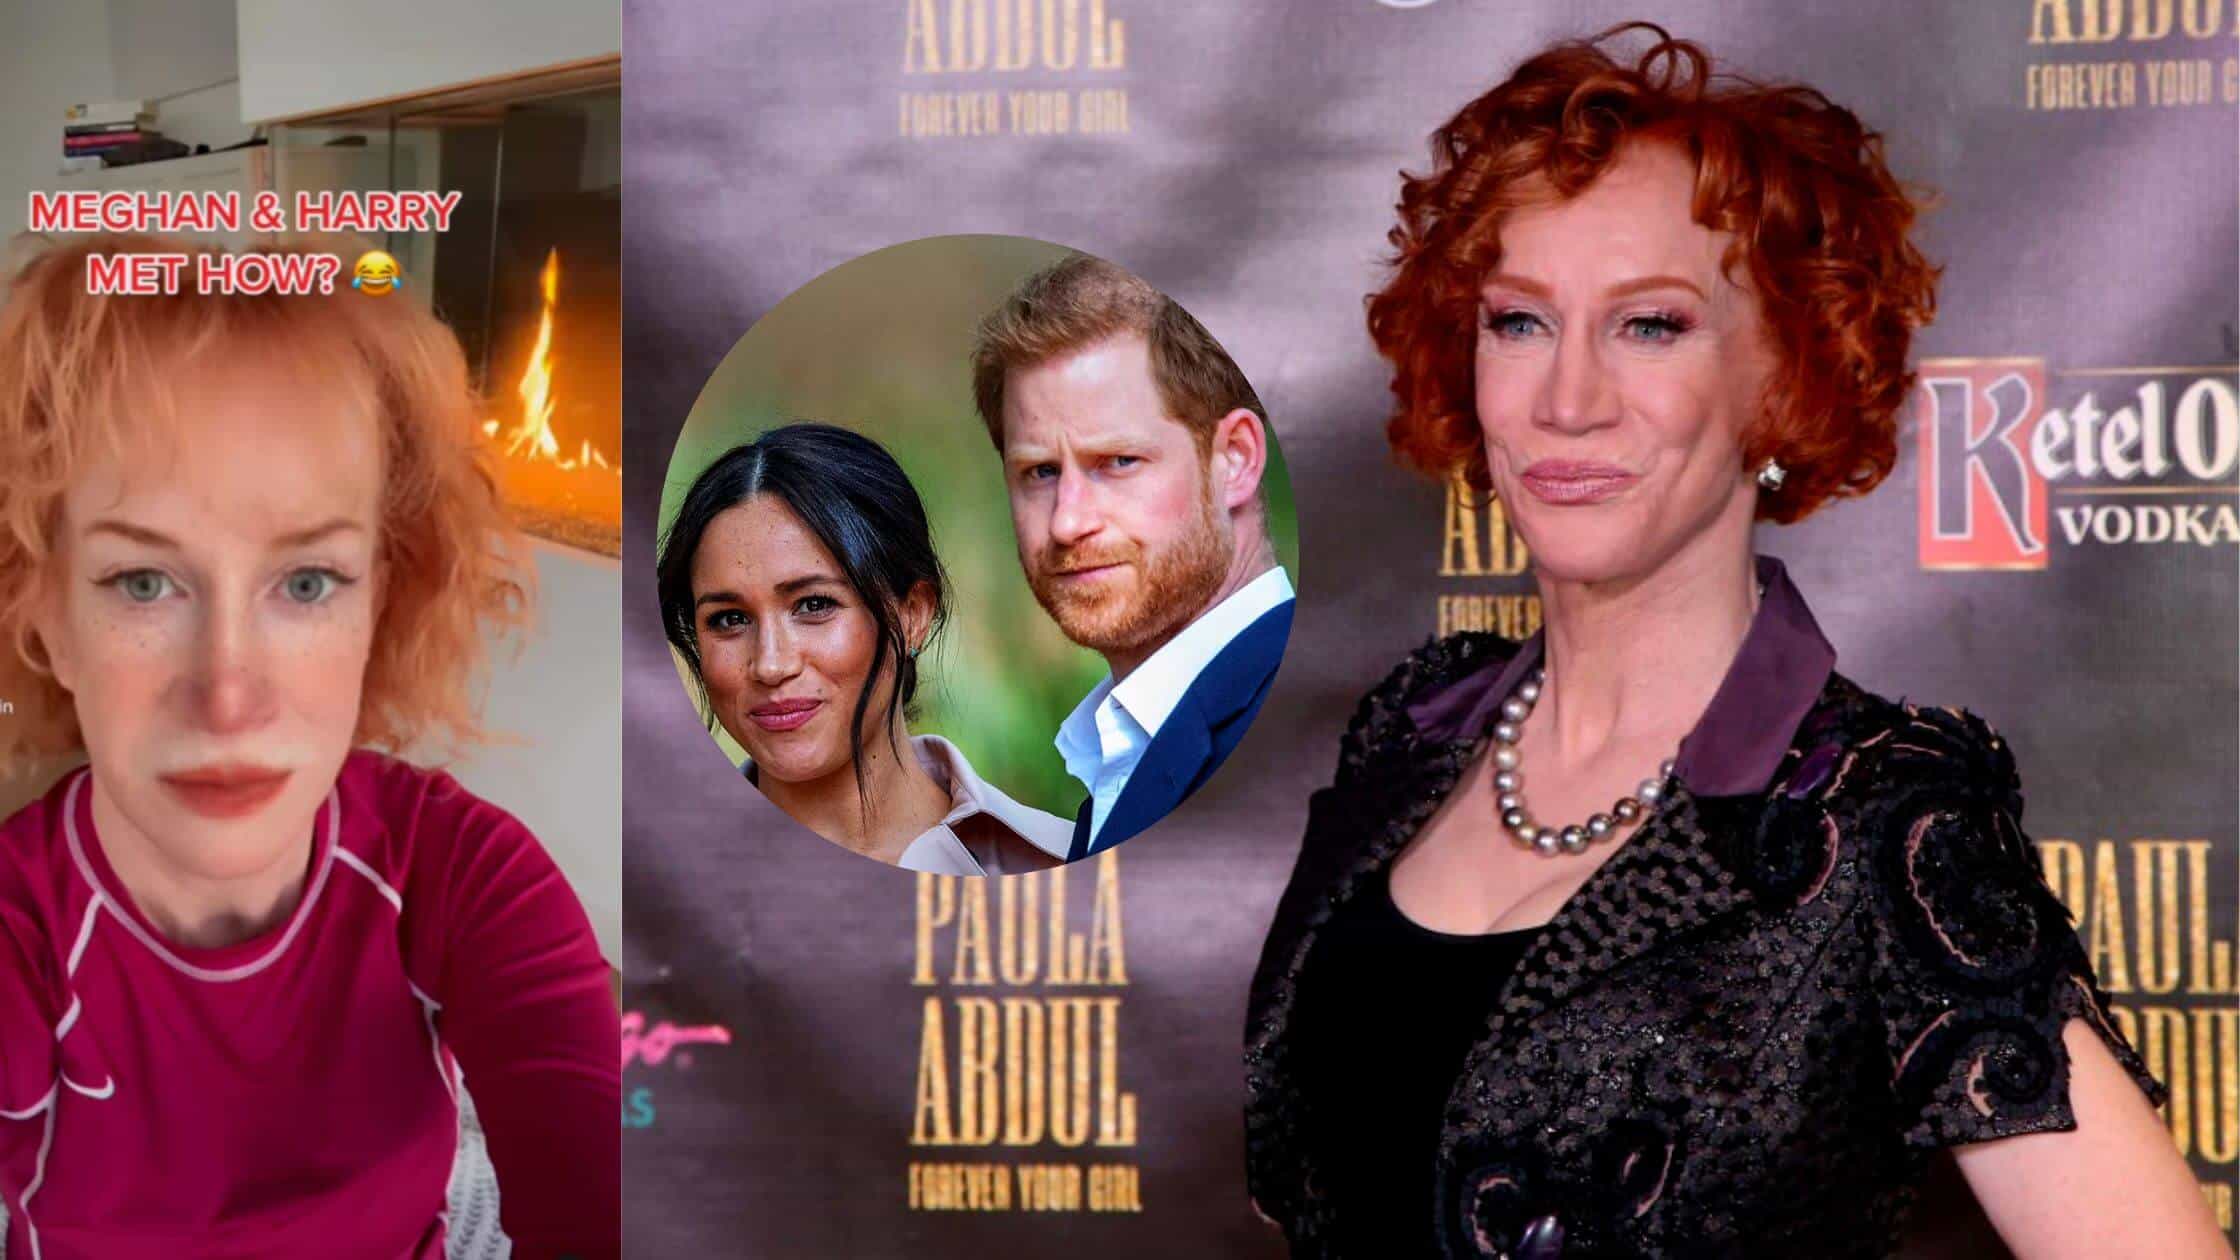 Kathy Griffin's Instagram Reveal Of Prince Harry Draws Comparisons To Actor Armie Hammer